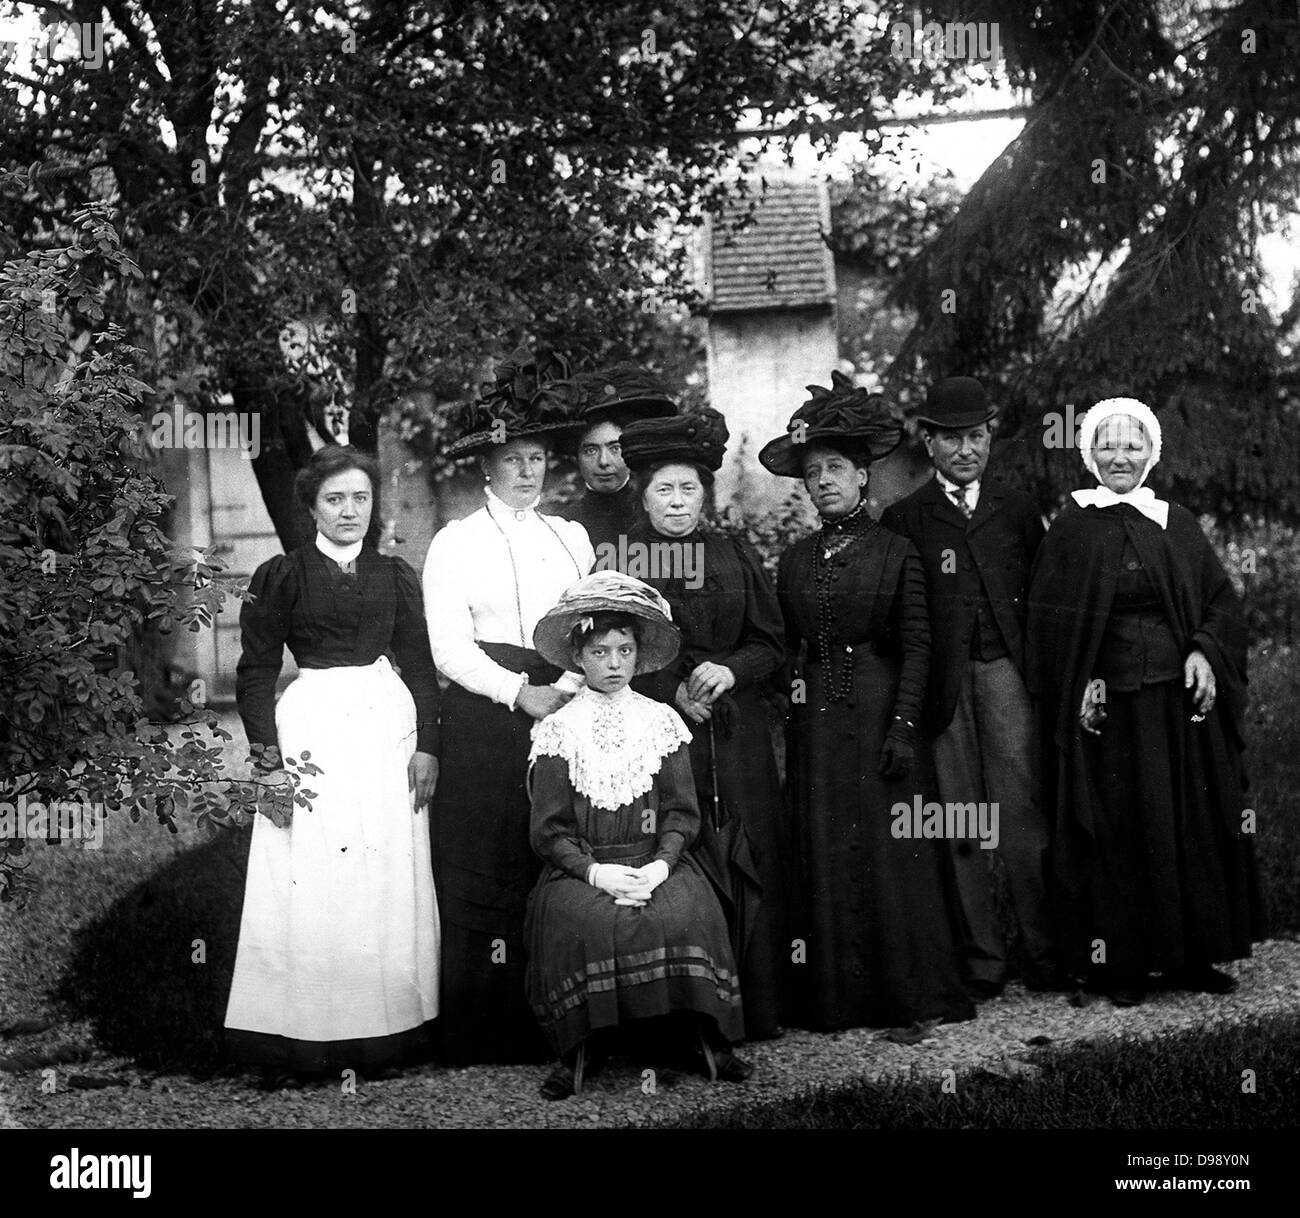 French villagers photographed circa 1911 Stock Photo